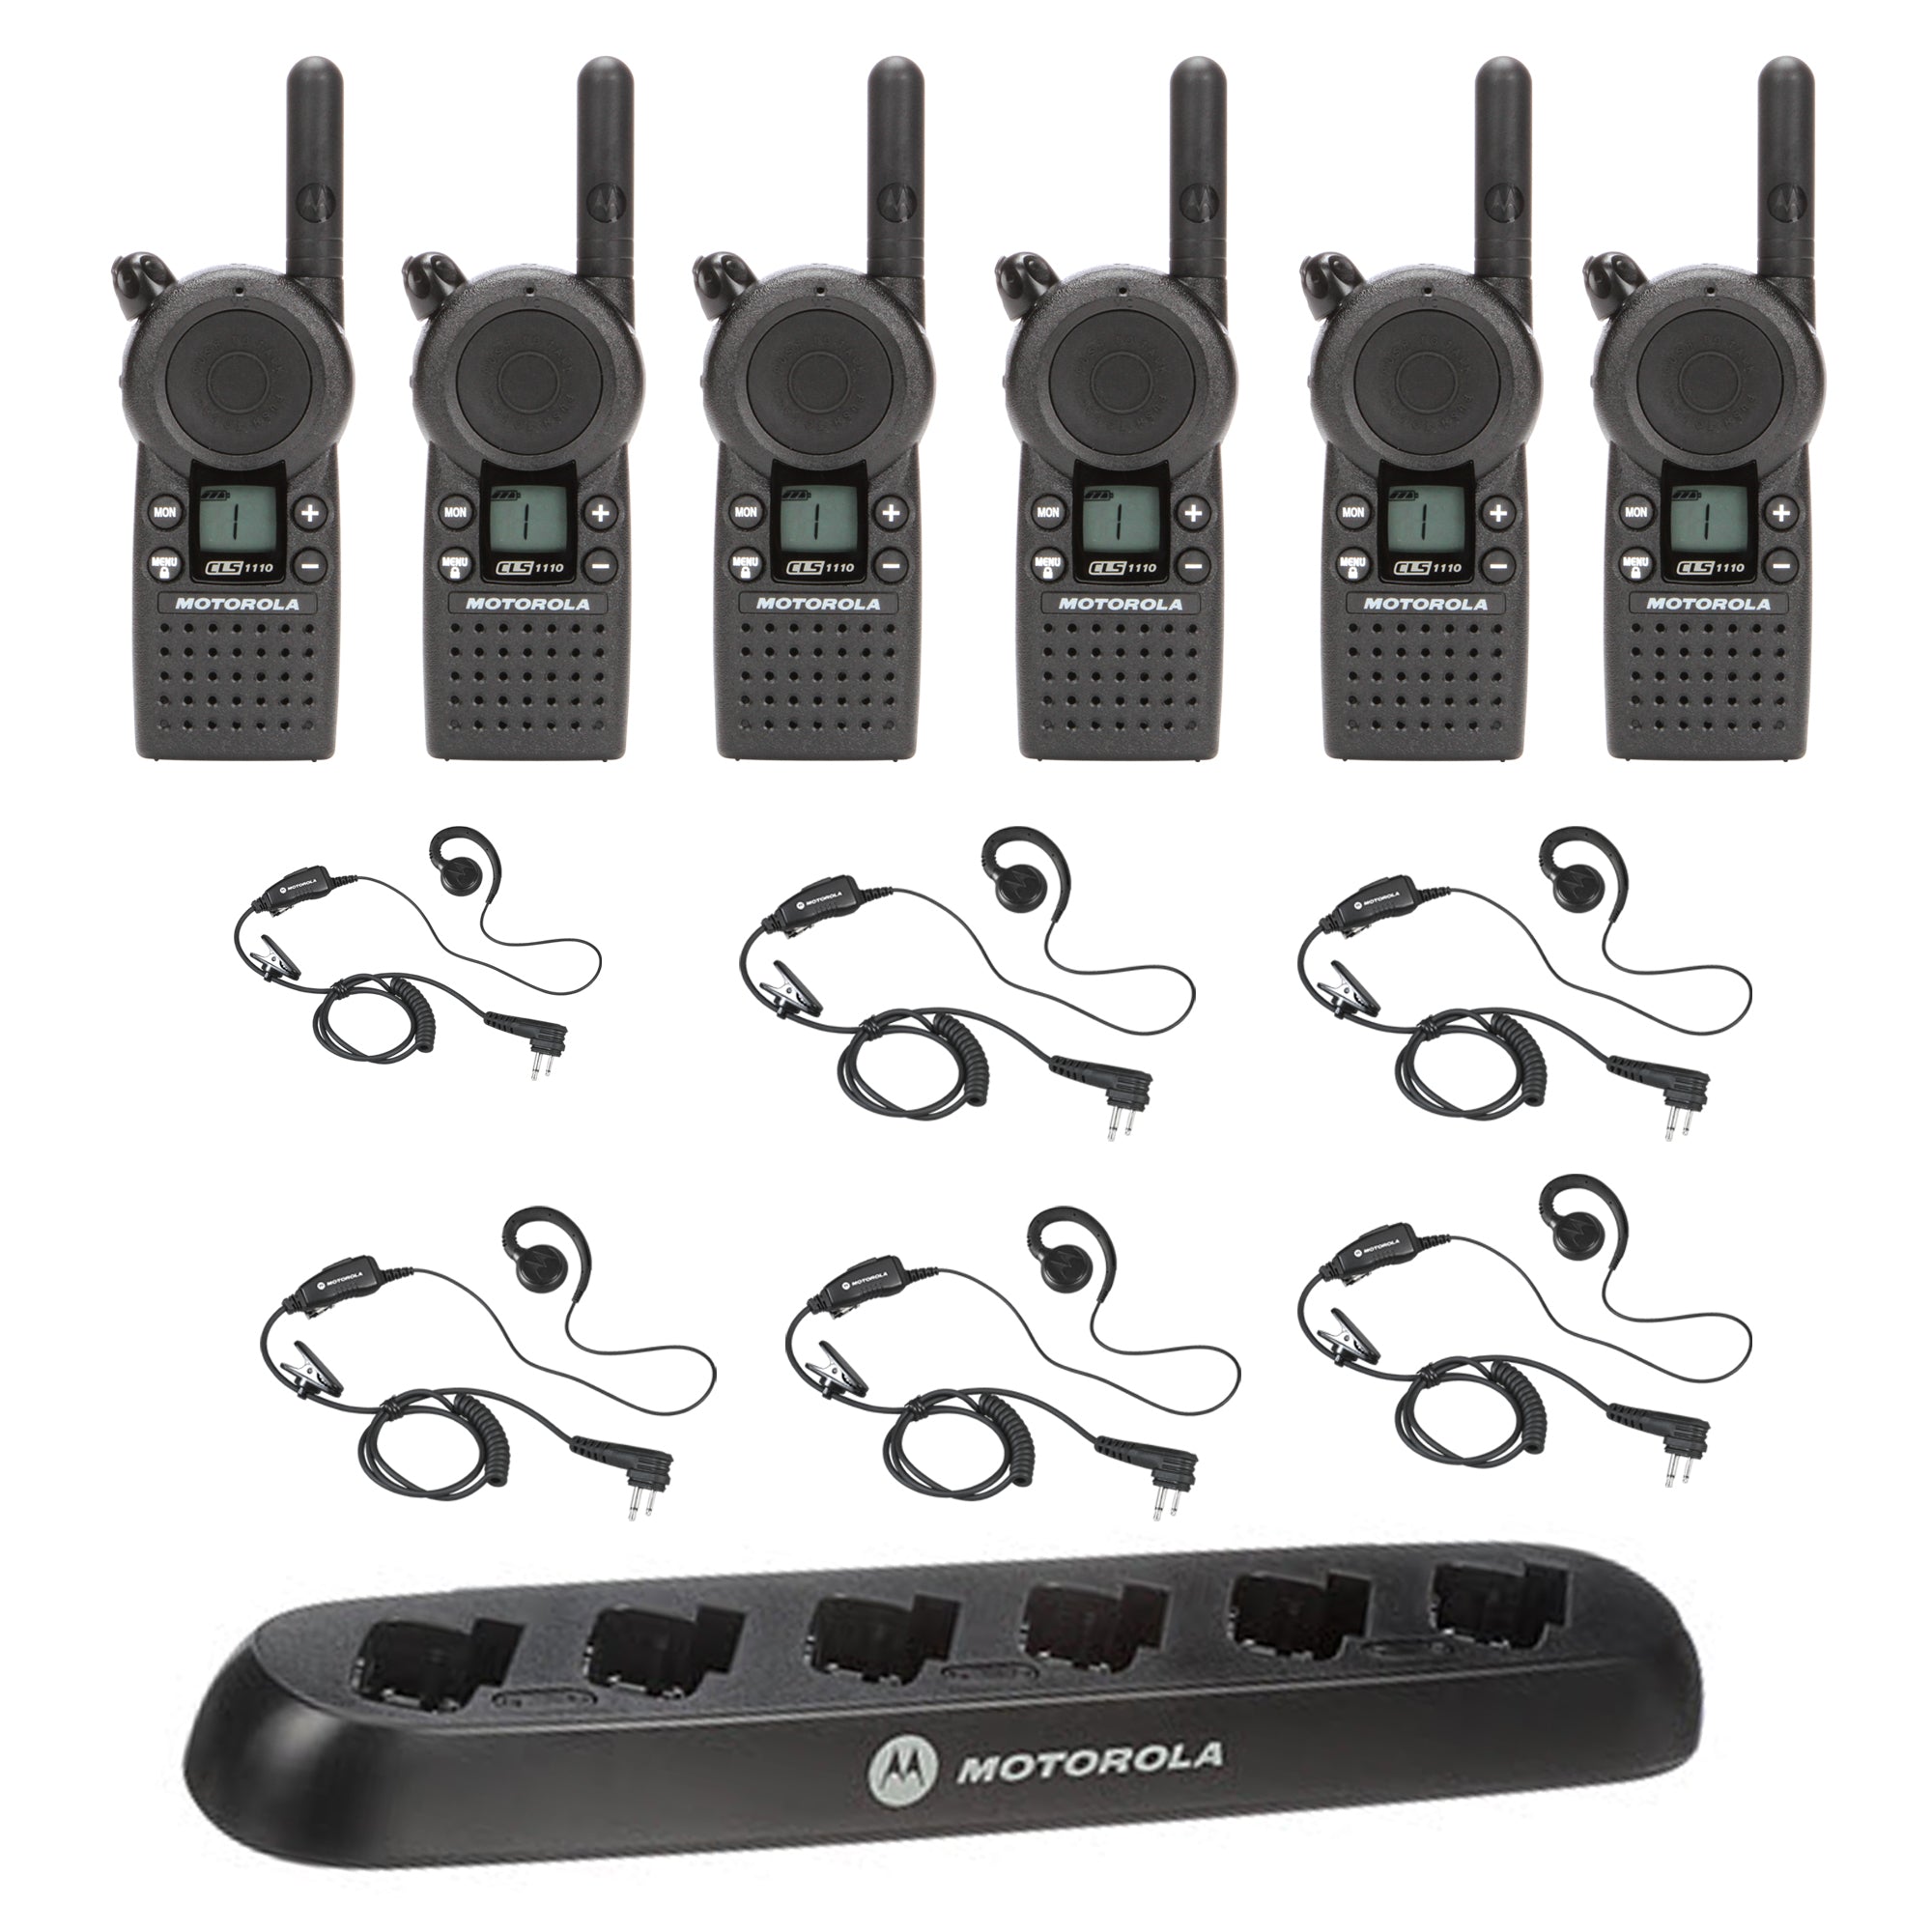 Motorola CLS1110 UHF Two Way Radio for business is a single